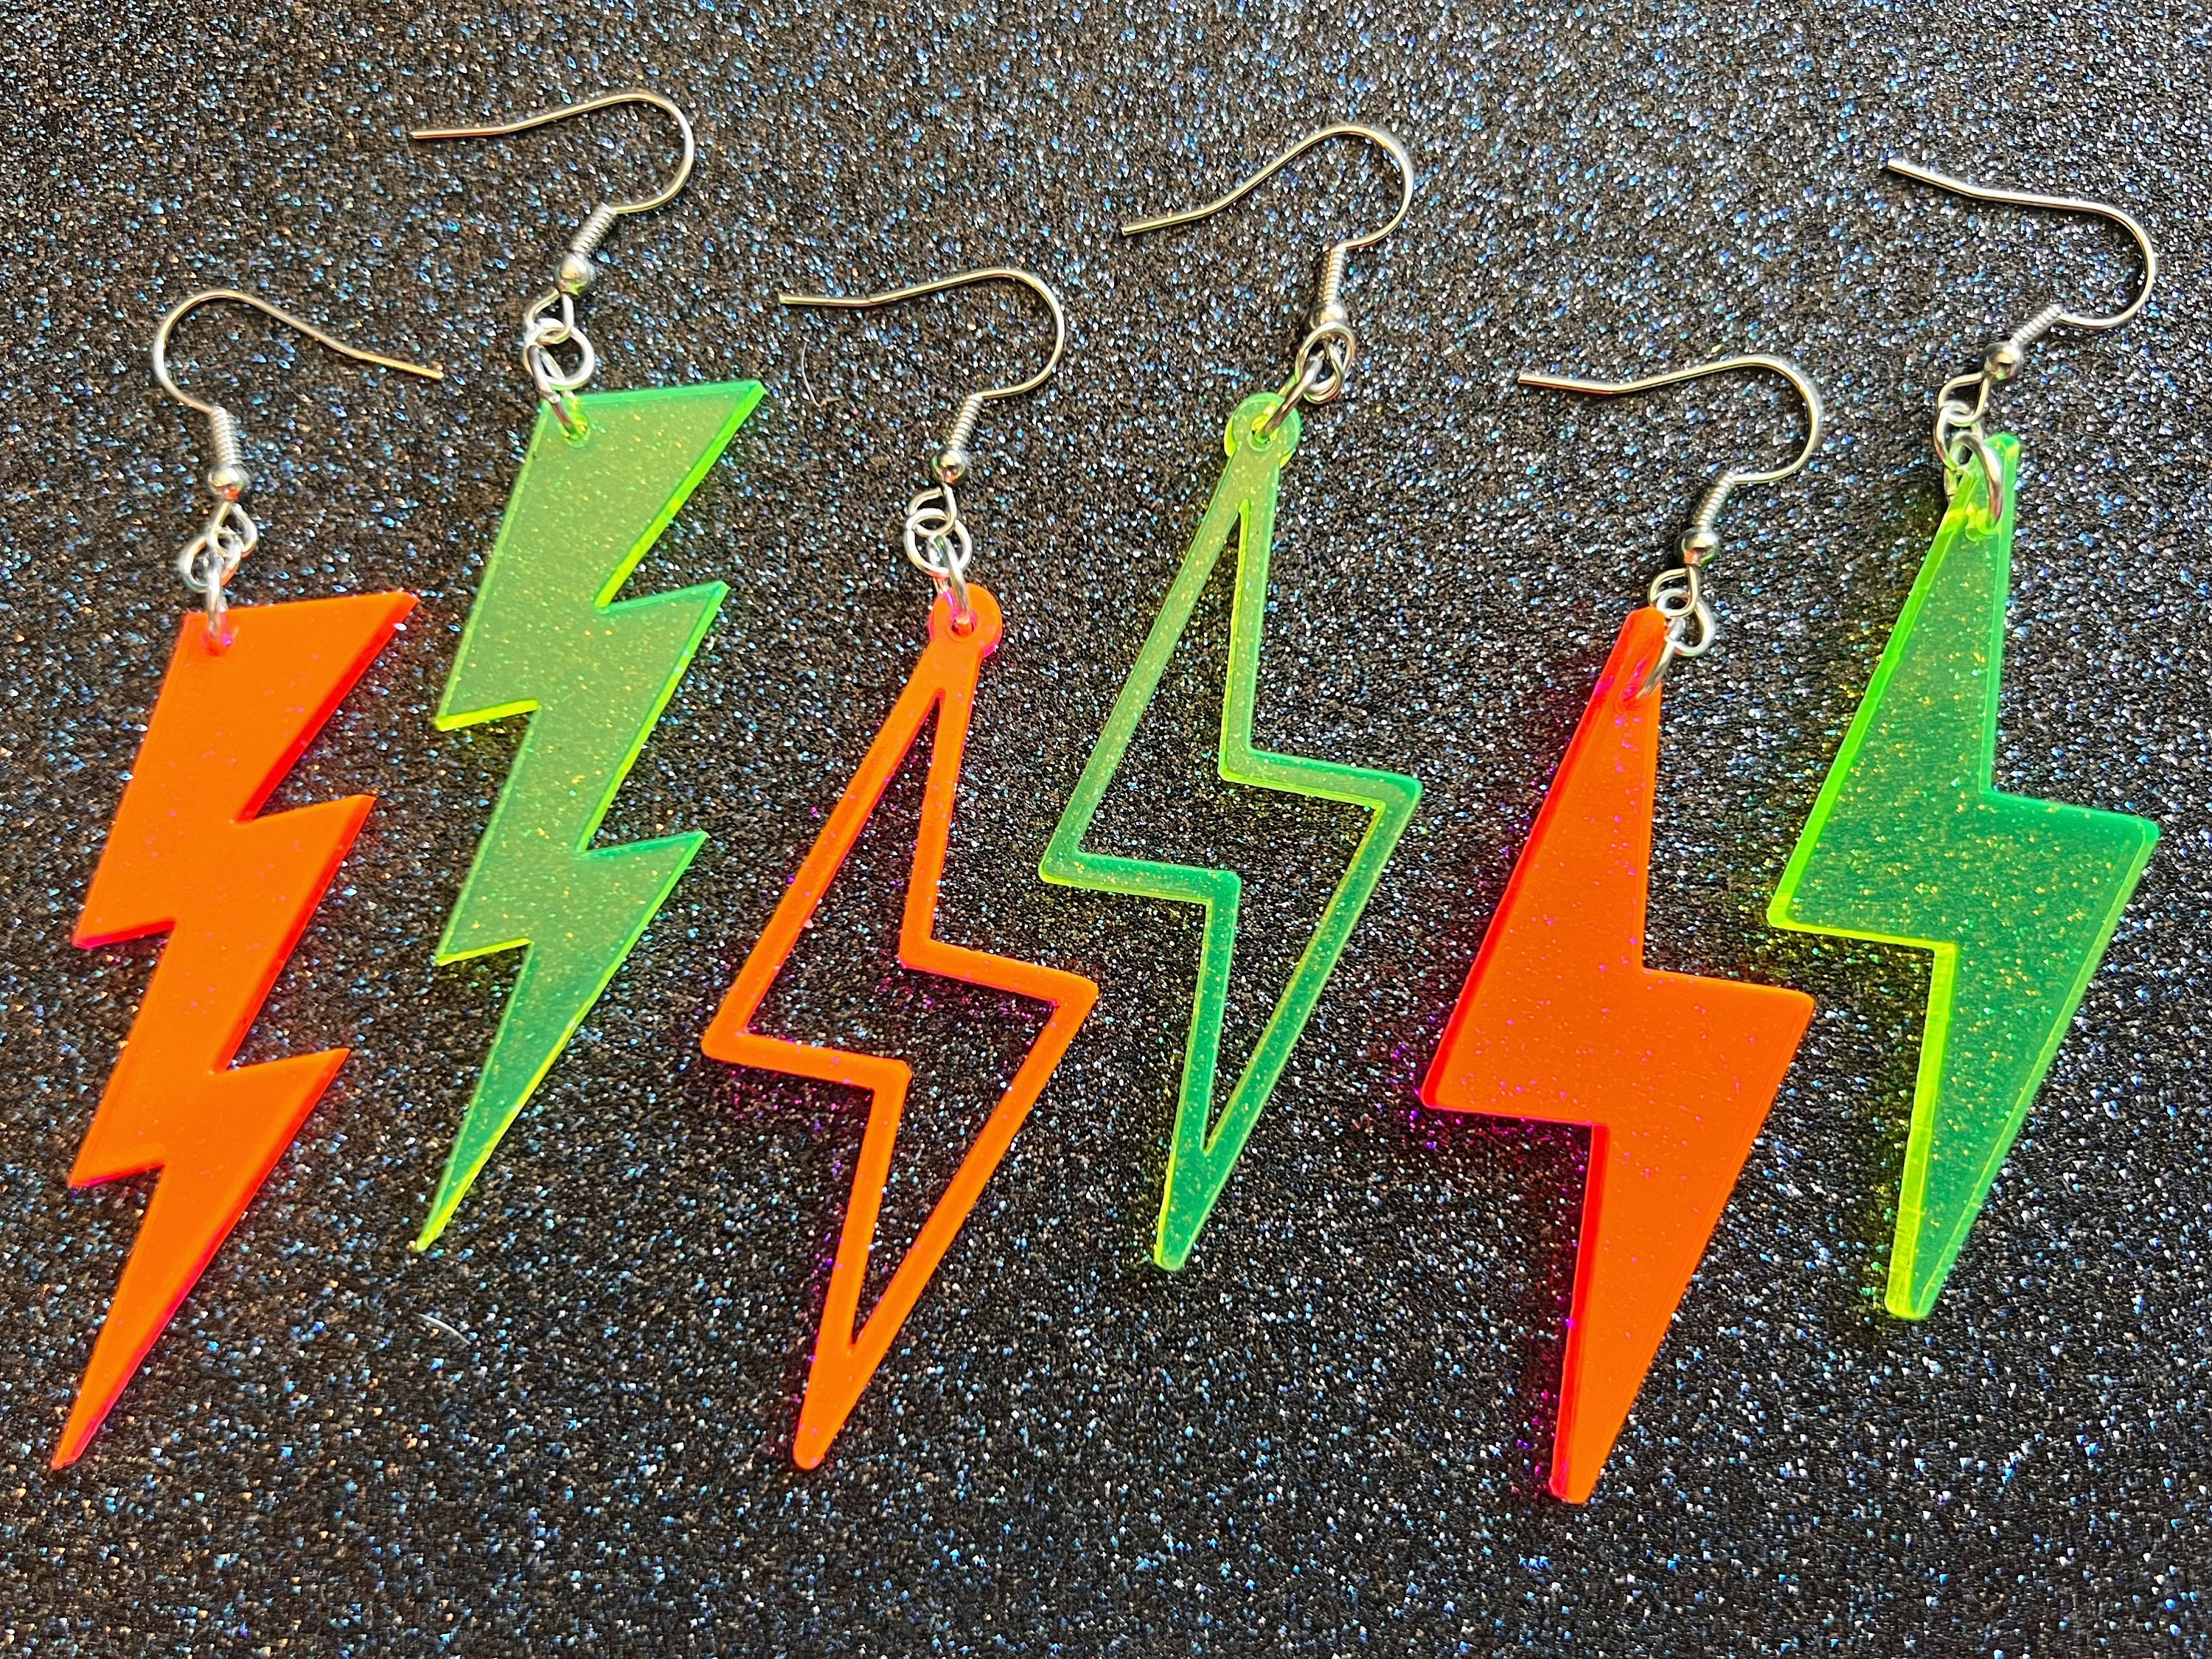 Amazoncom Neon Green Lightning Bolt Earrings  Clothing Shoes  Jewelry